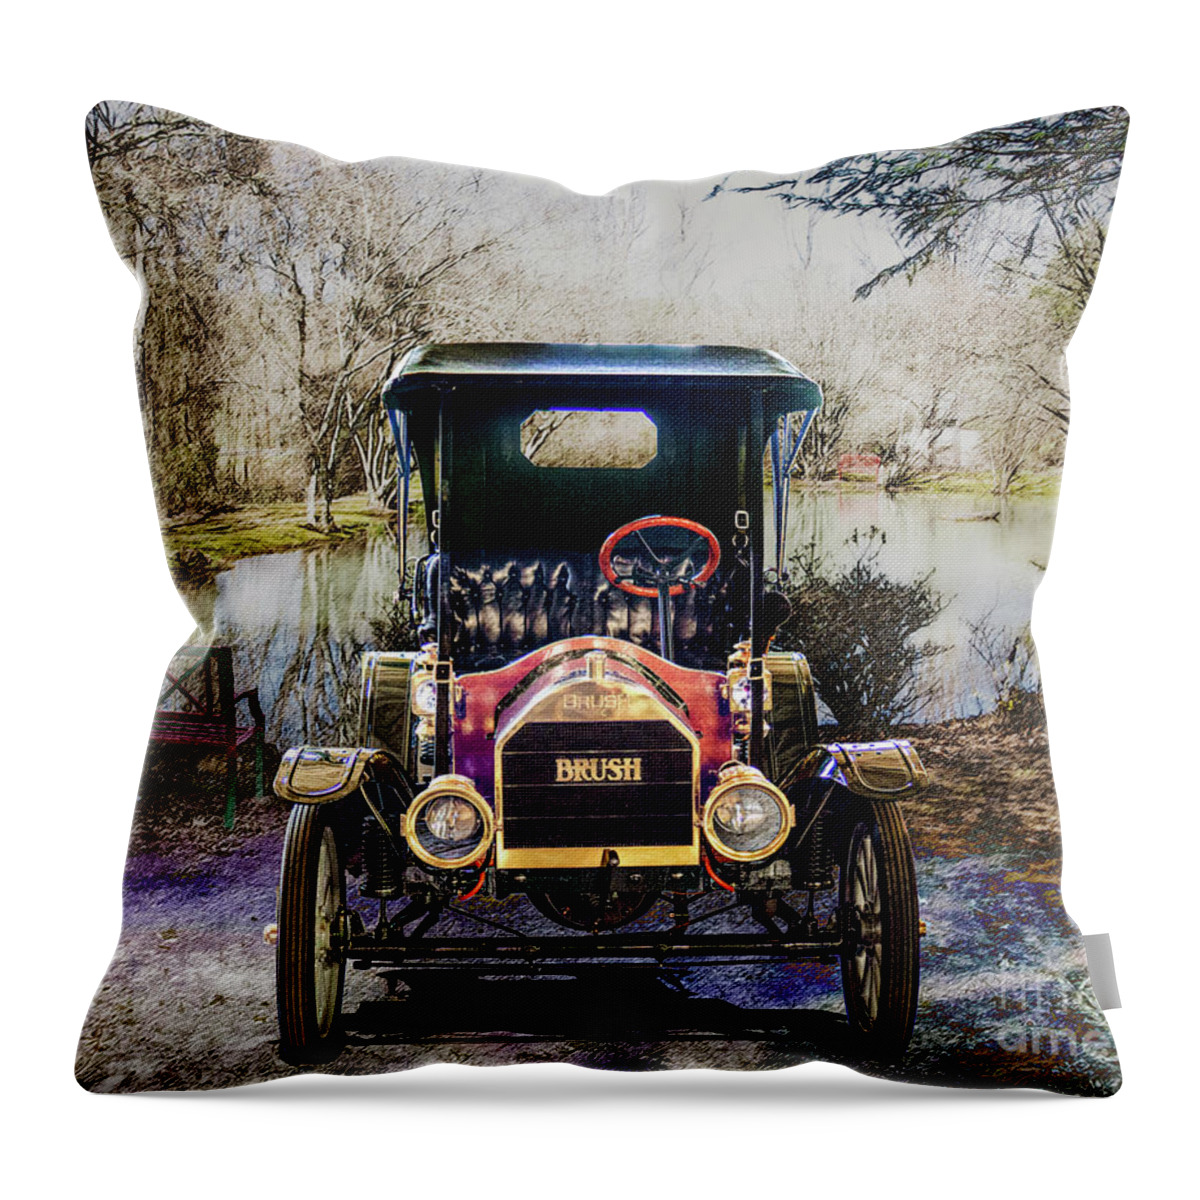 07 Throw Pillow featuring the digital art 1911 Brush Model F by Anthony Ellis